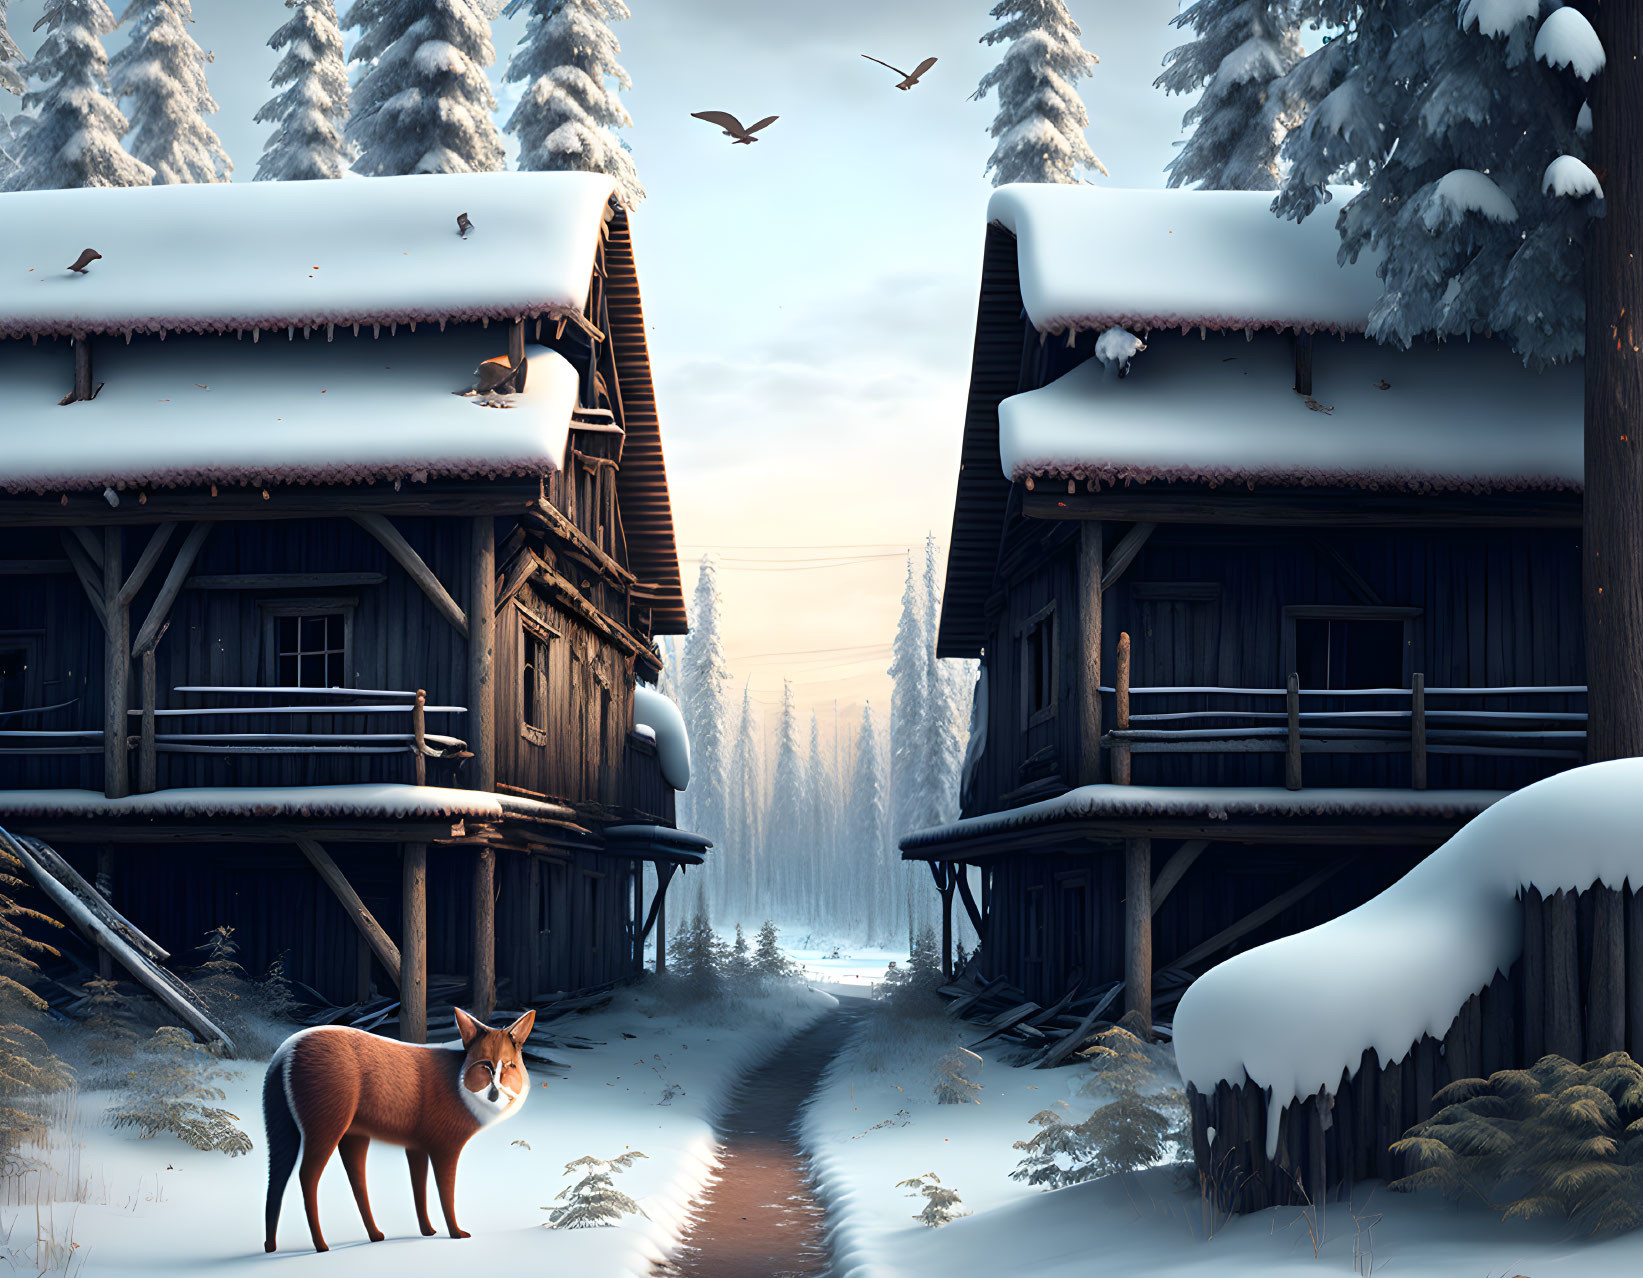 Snow-covered log cabins with wildlife in serene winter forest